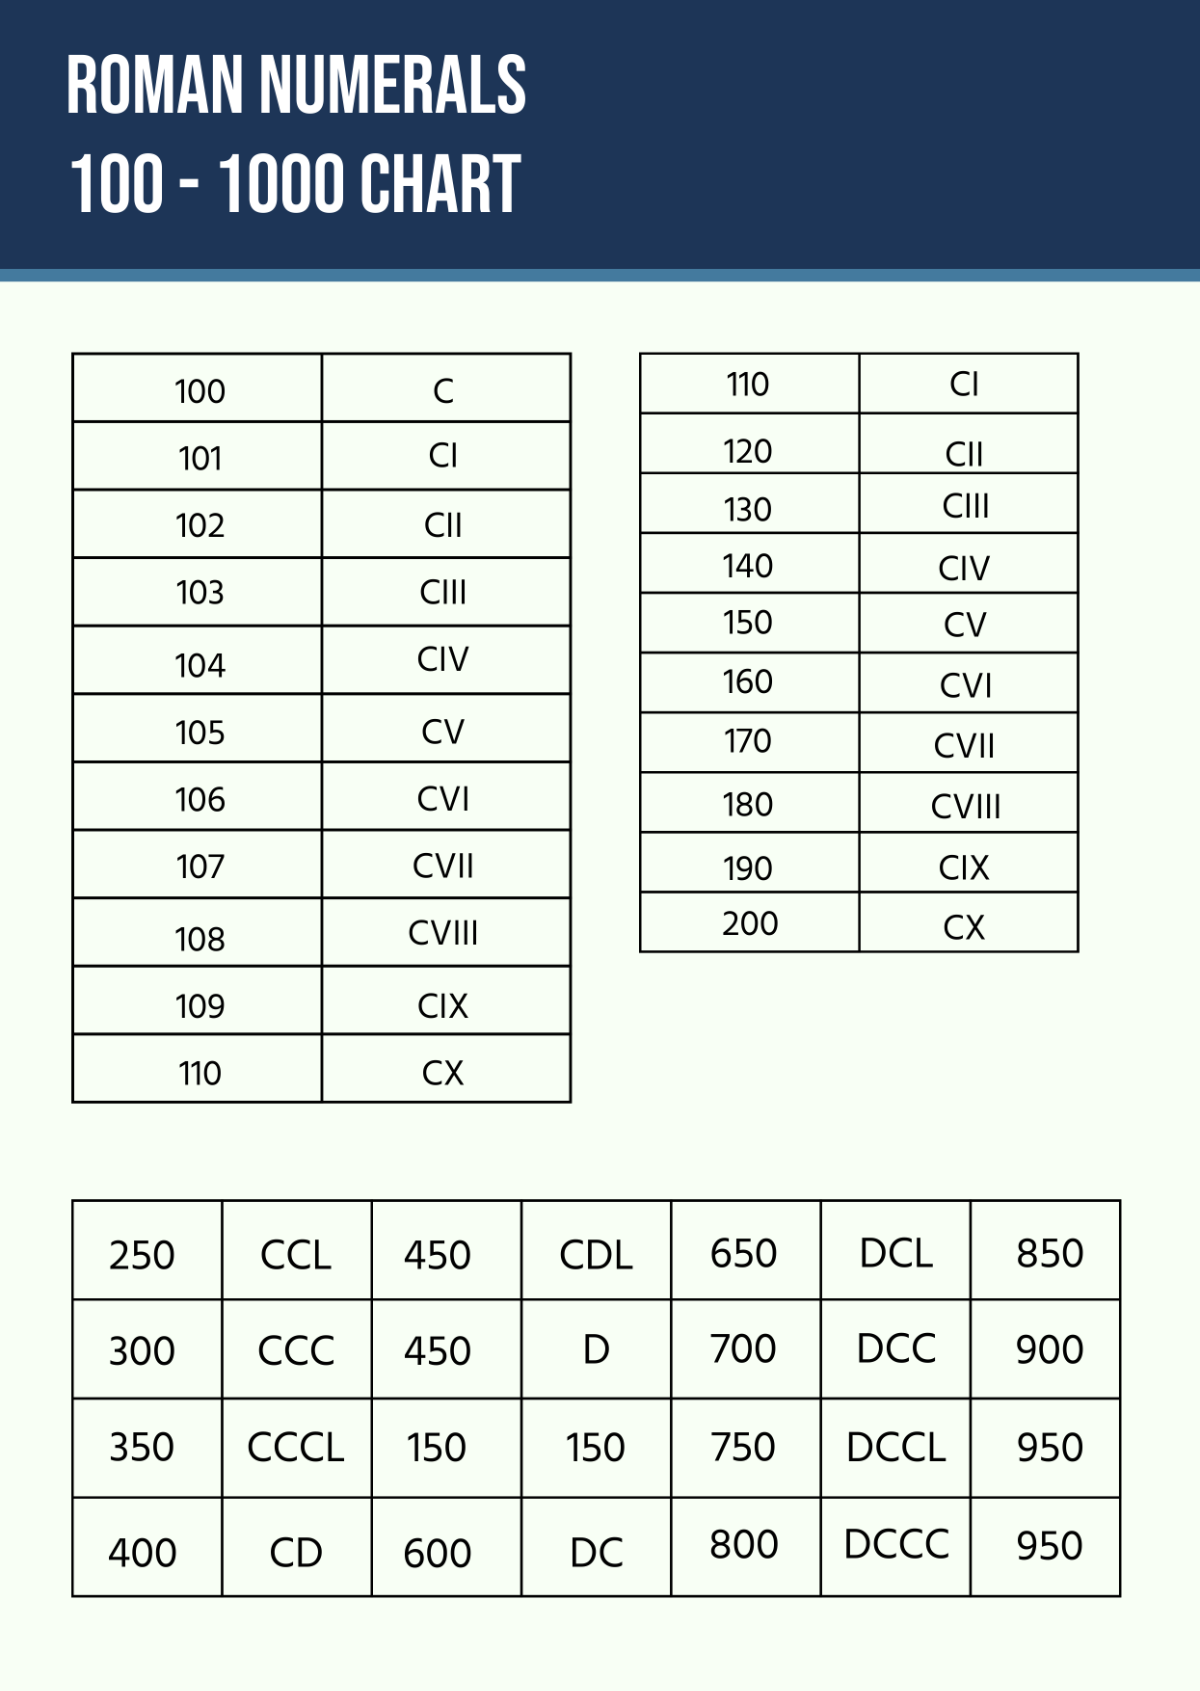 Roman Numerals 100 to 1000 Chart